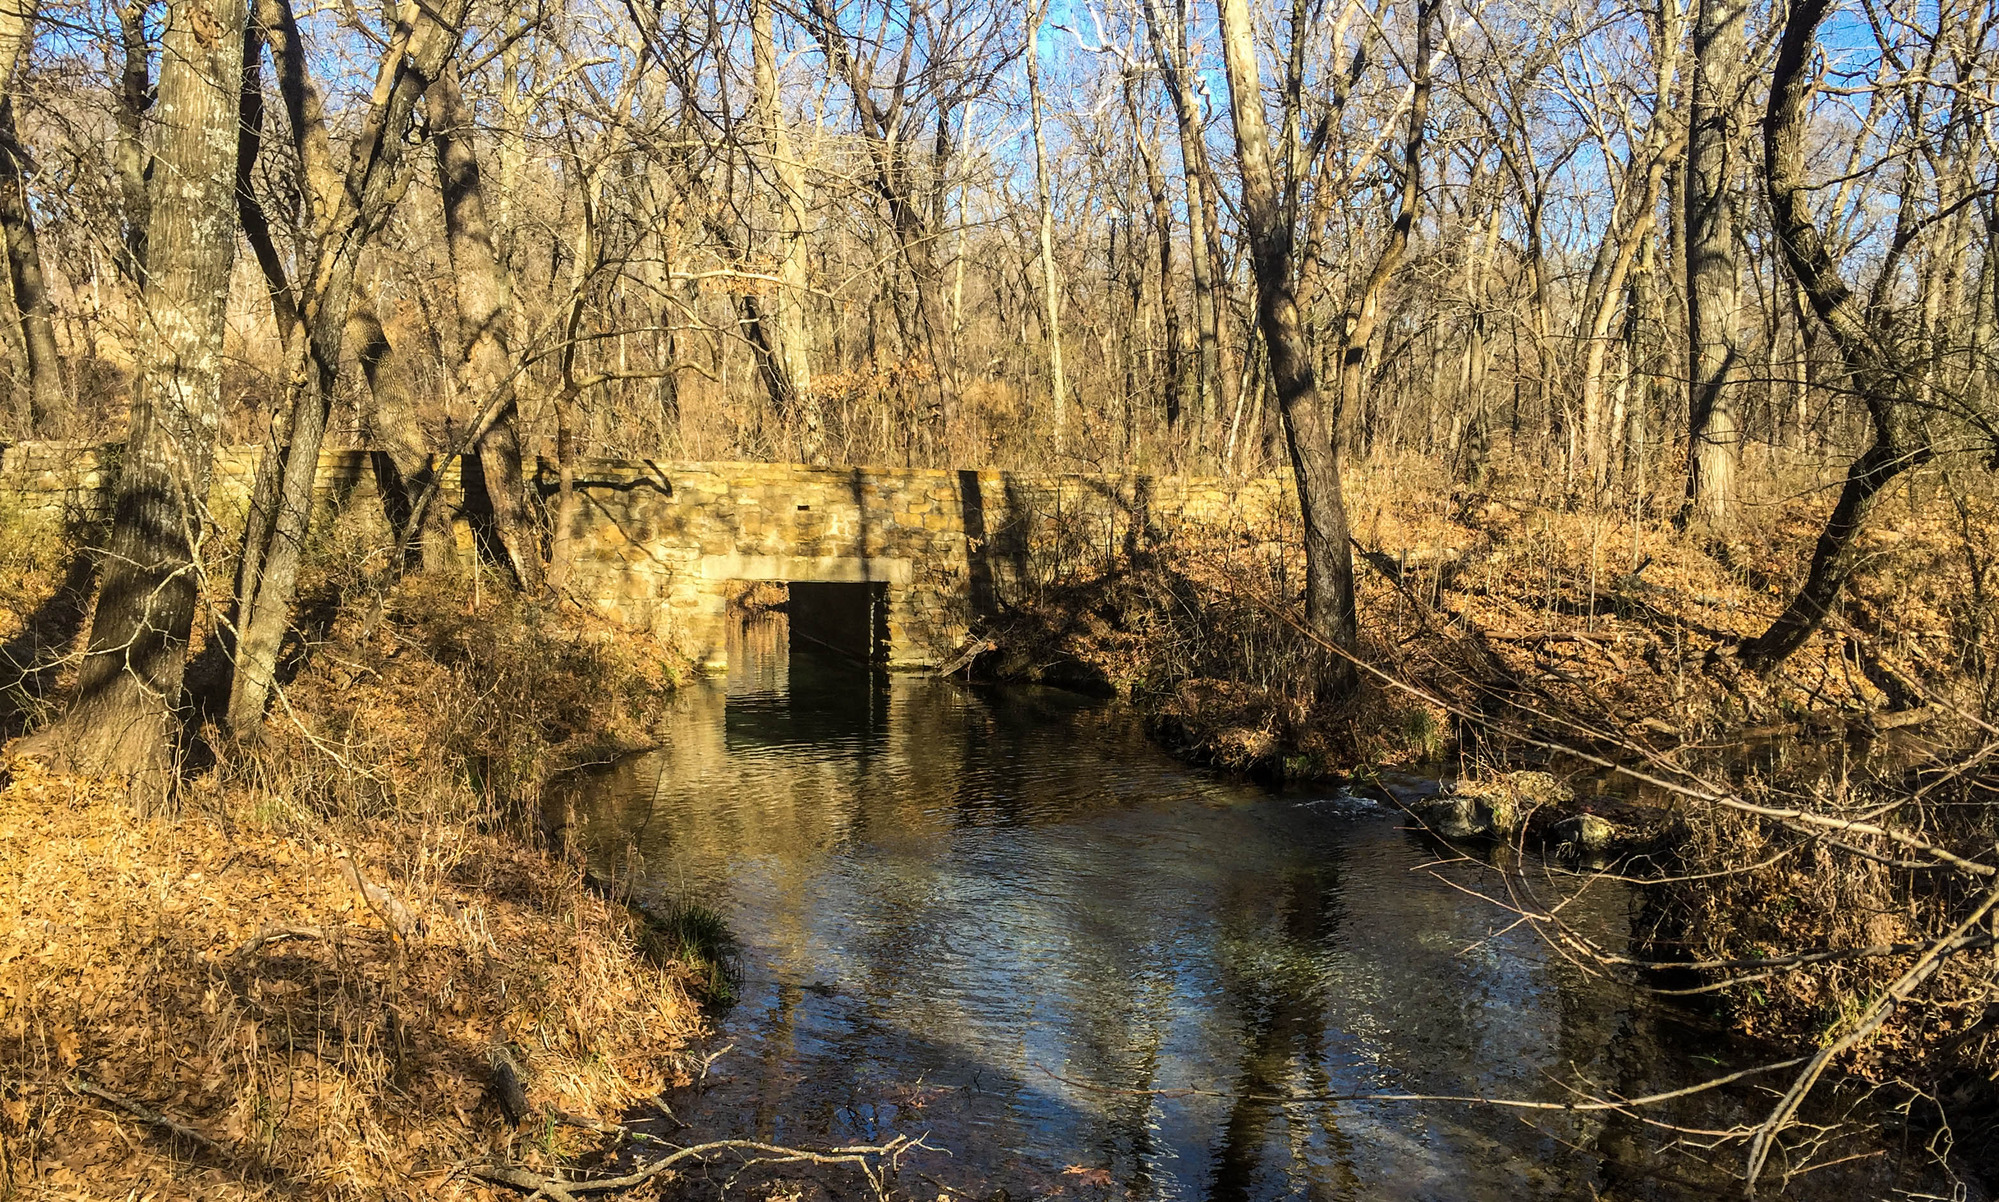 Stone bridge over water Creek in woods bare of foliage during winter